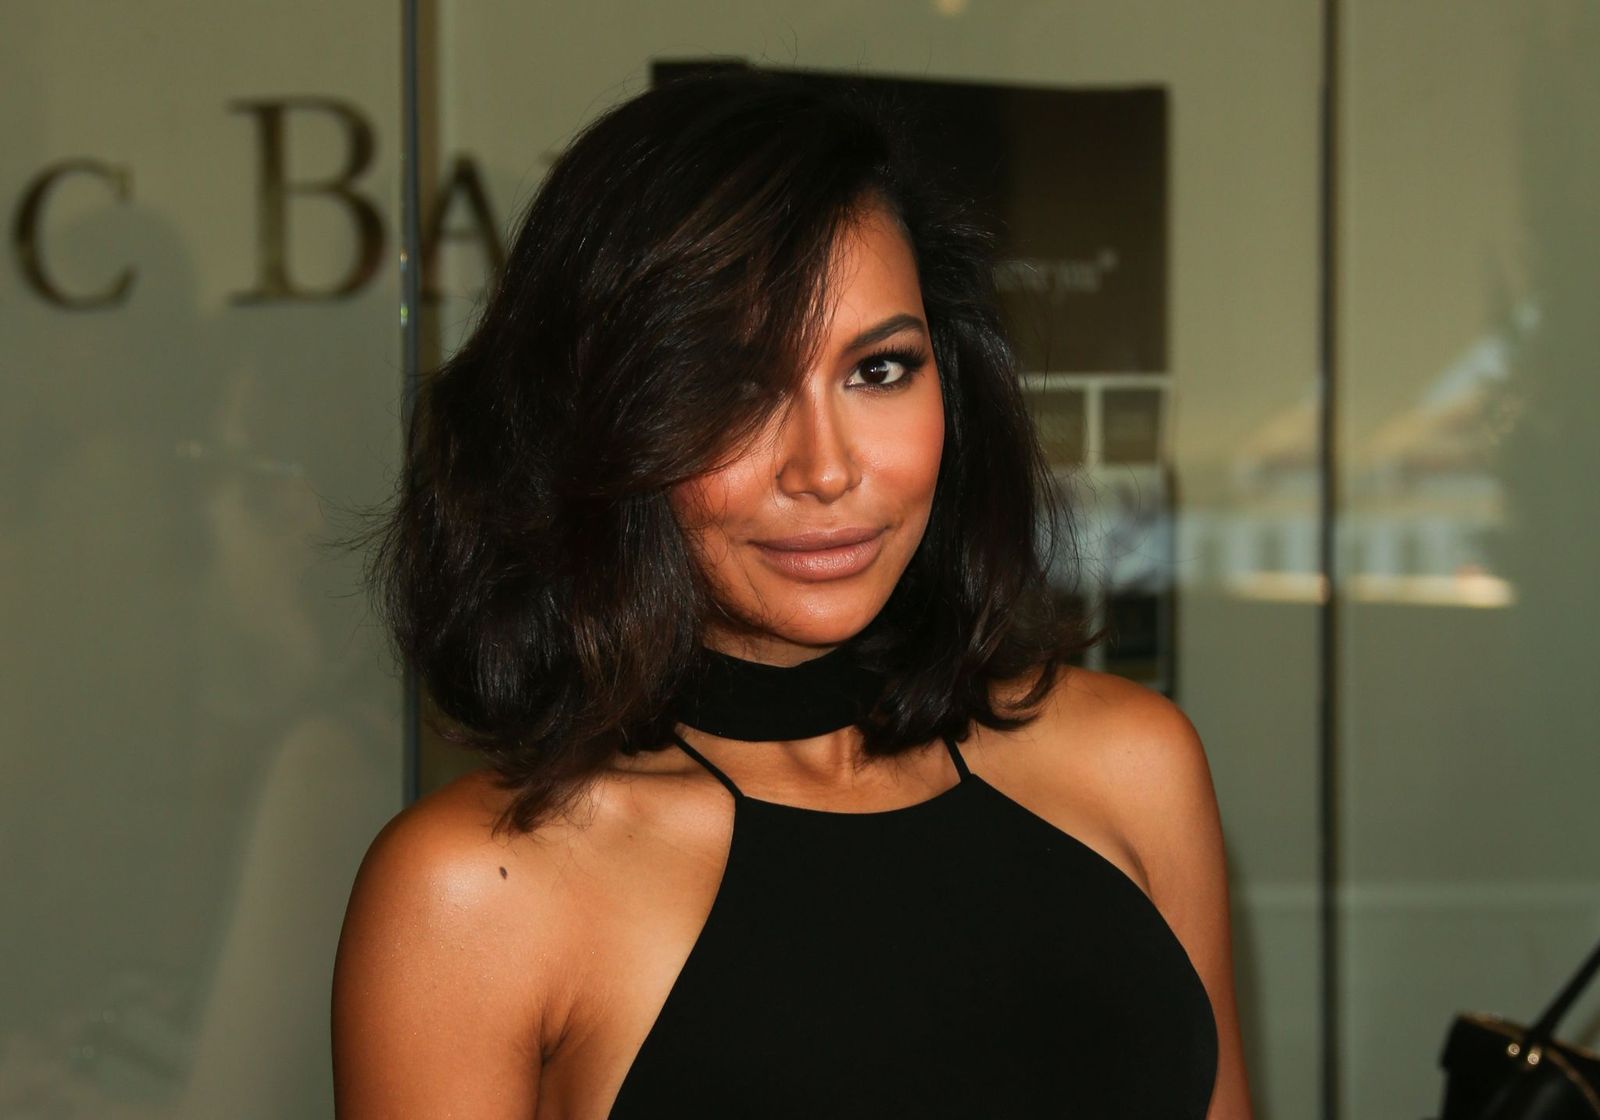 The late Naya Rivera at the "Raising The Bar To End Parkinson's" event at Laurel Point on July 27, 2016 | Photo: Getty Images